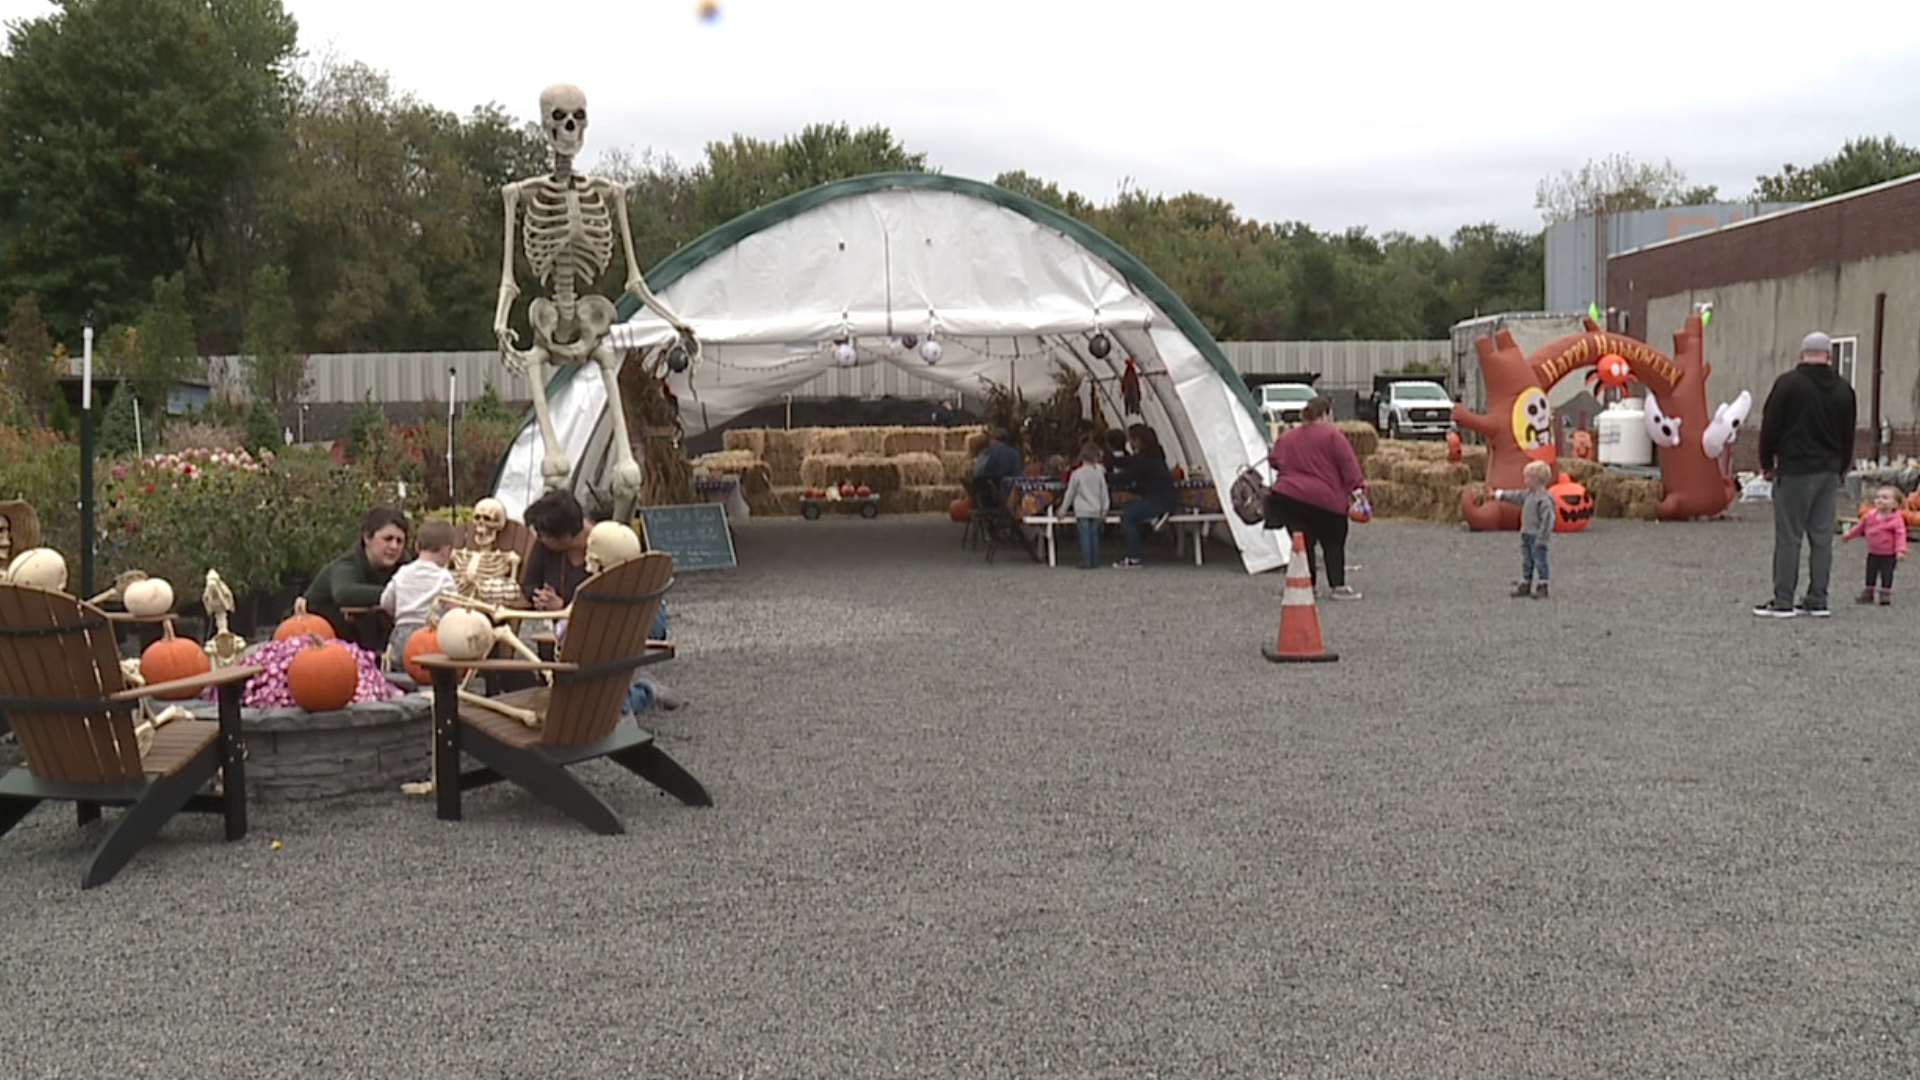 The garden center holds their fall festival every weekend in Luzerne County.